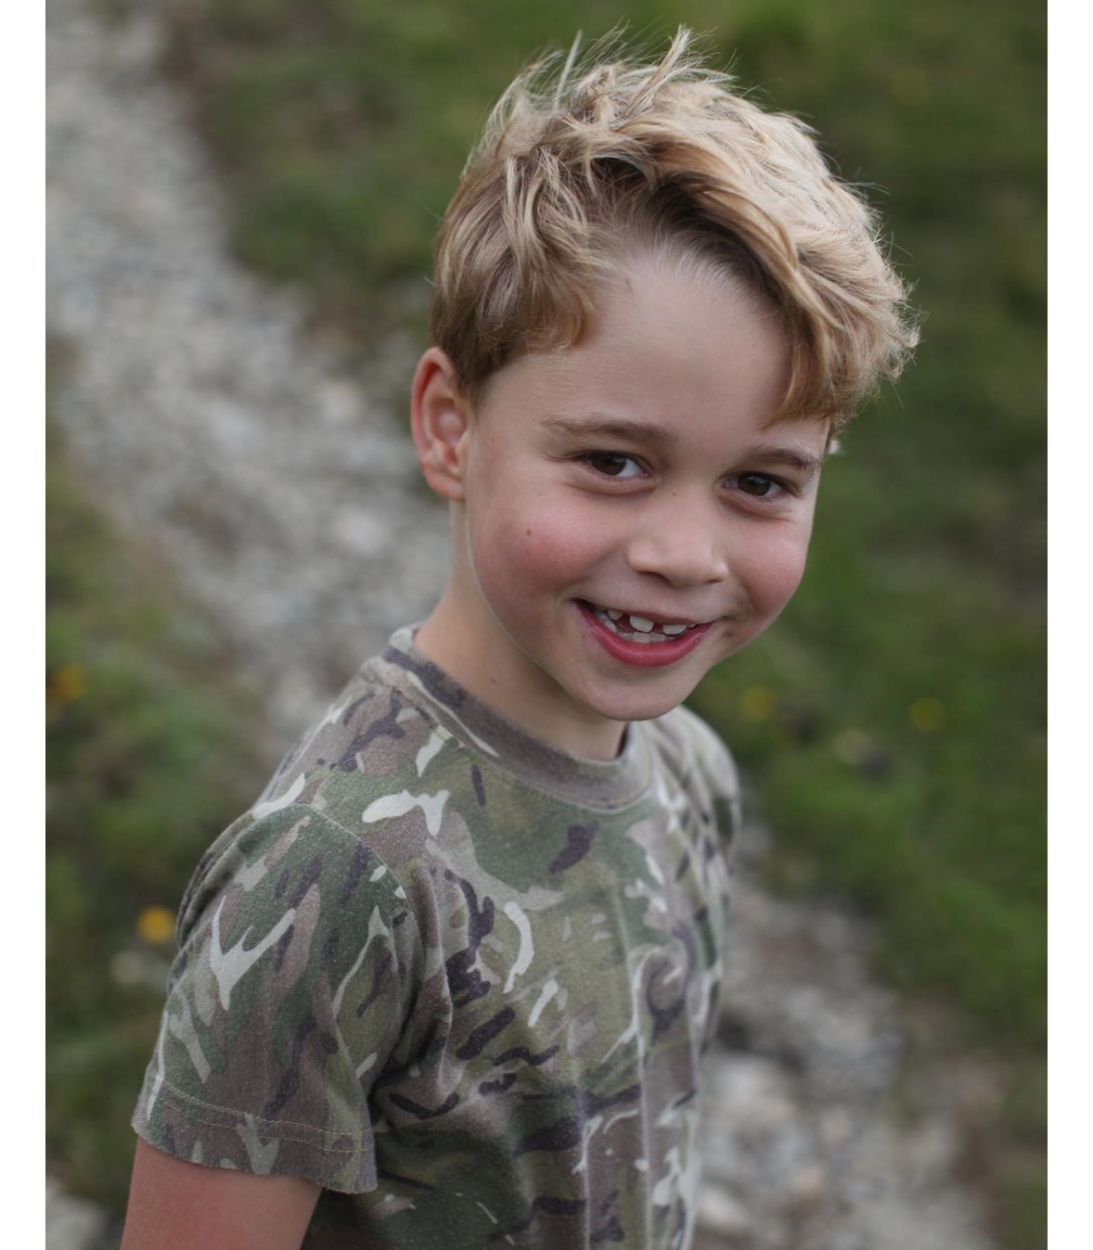 A picture of Prince George wearing camo and smiling